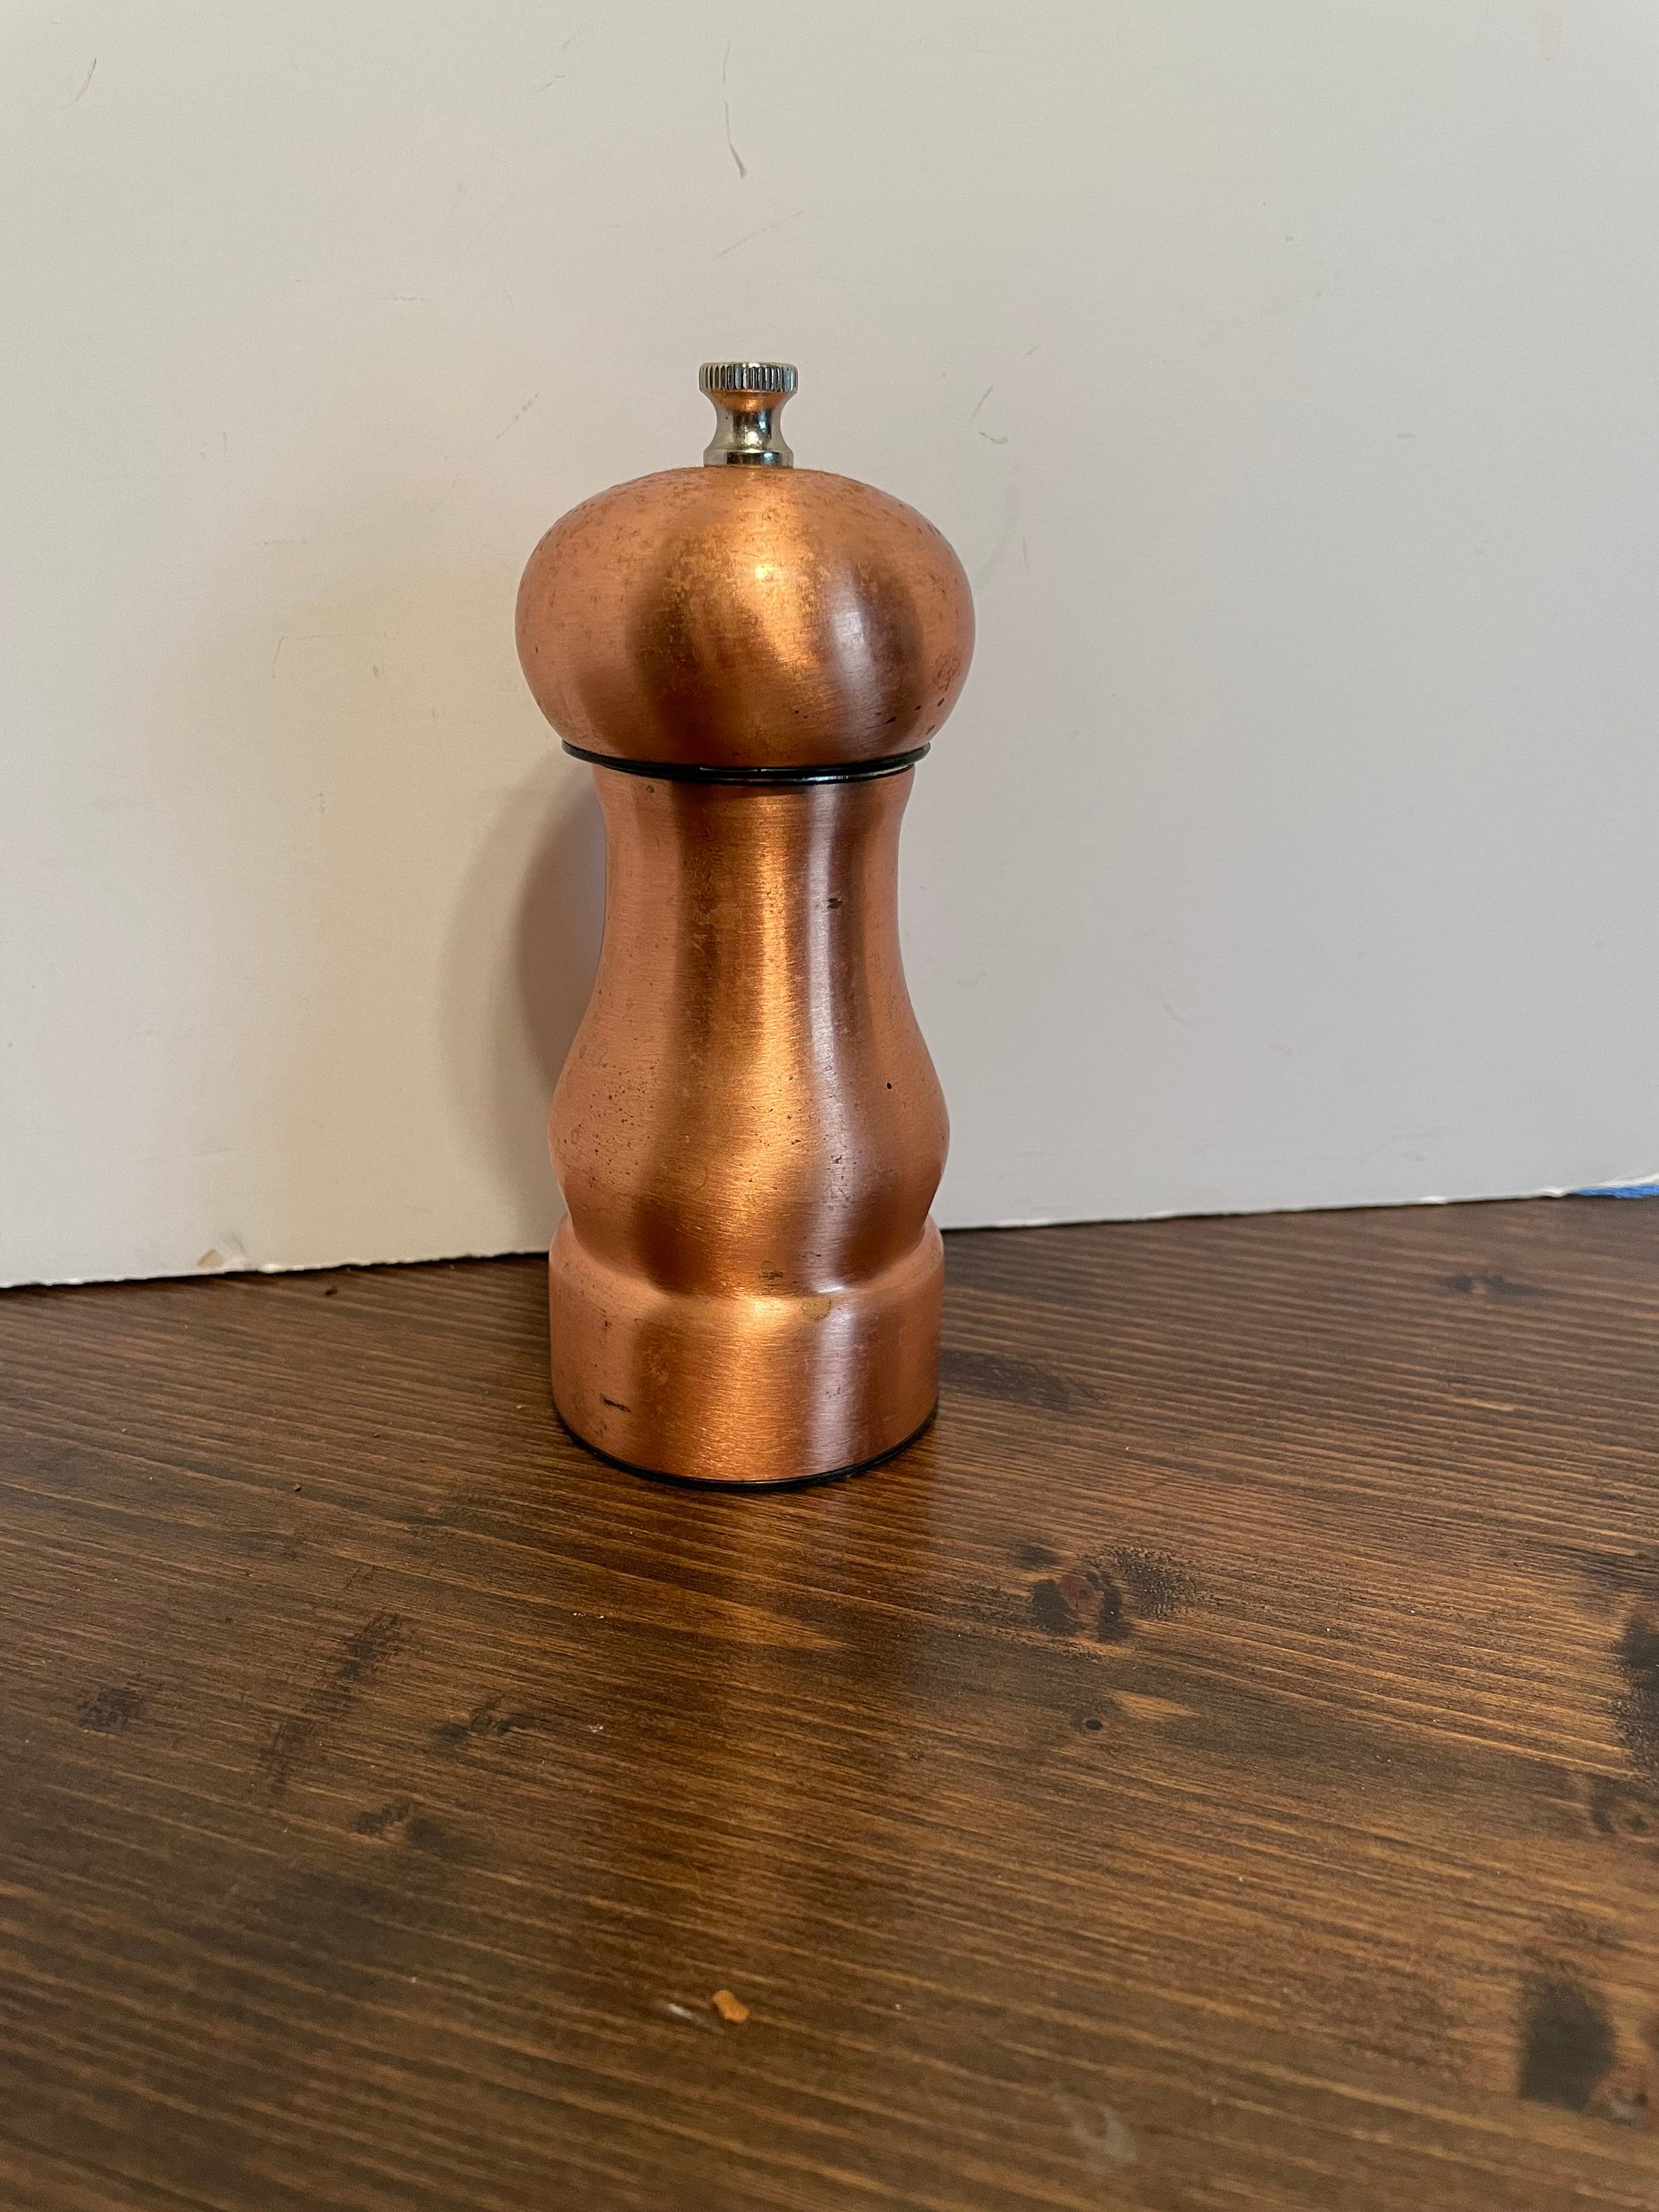 Antique Style Copper Finish Peppermill Mechanism